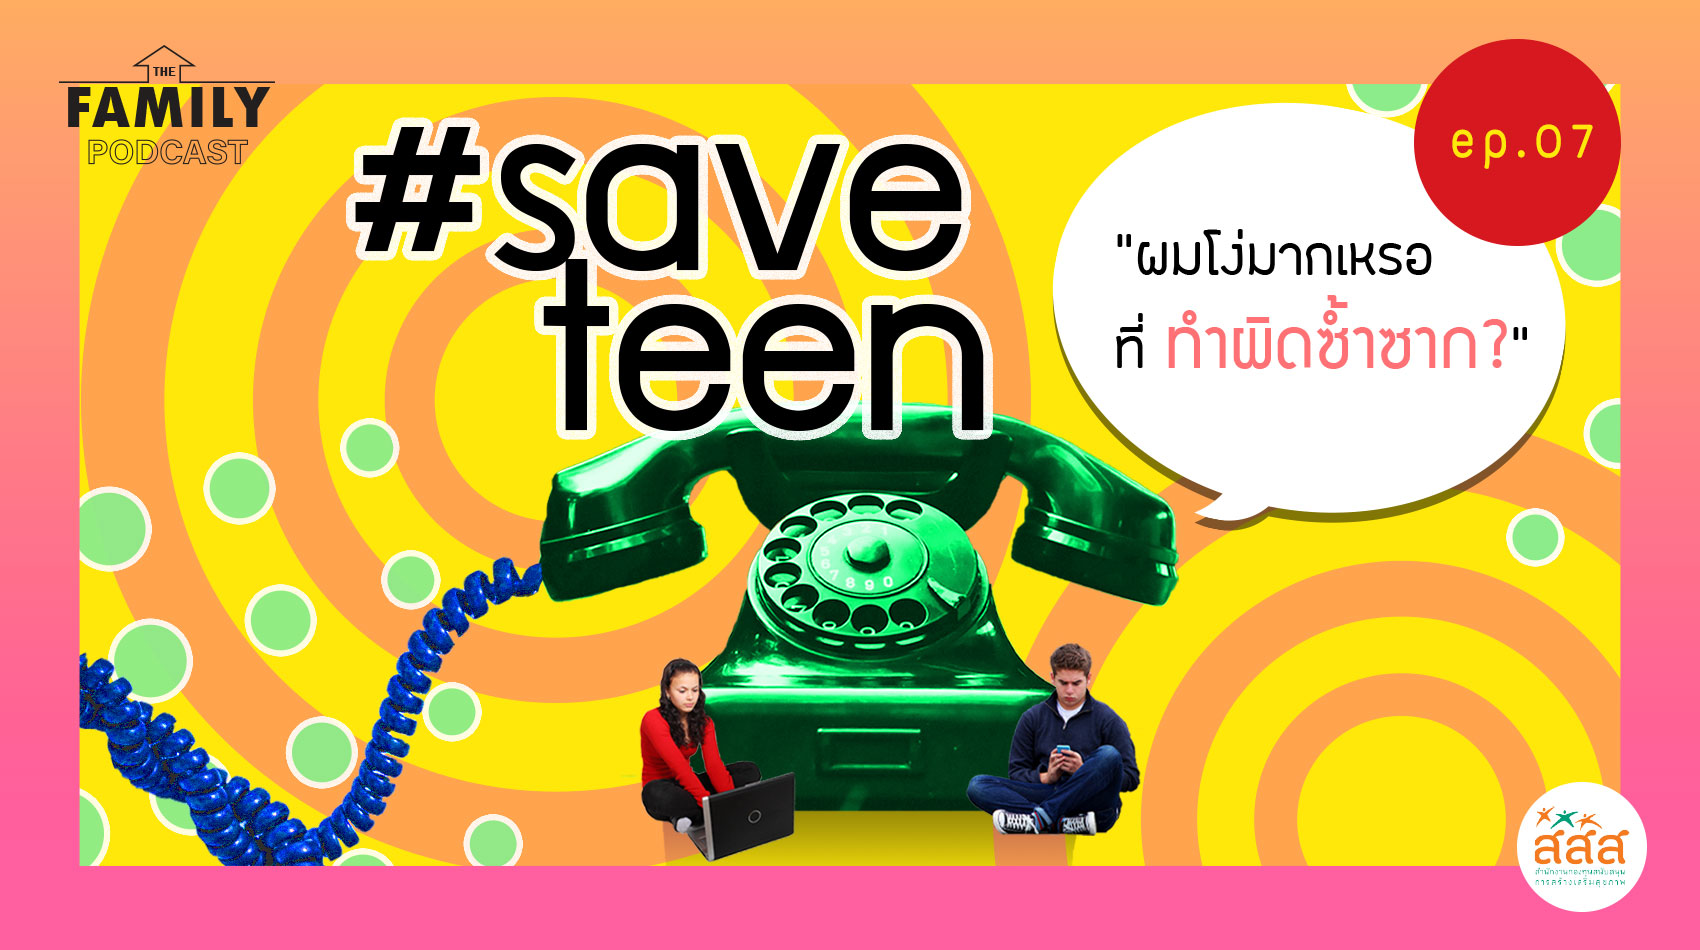 The Family Podcast Save teen EP.07 ผมโง่มากเหรอที่ทำผิดซ้ำซาก